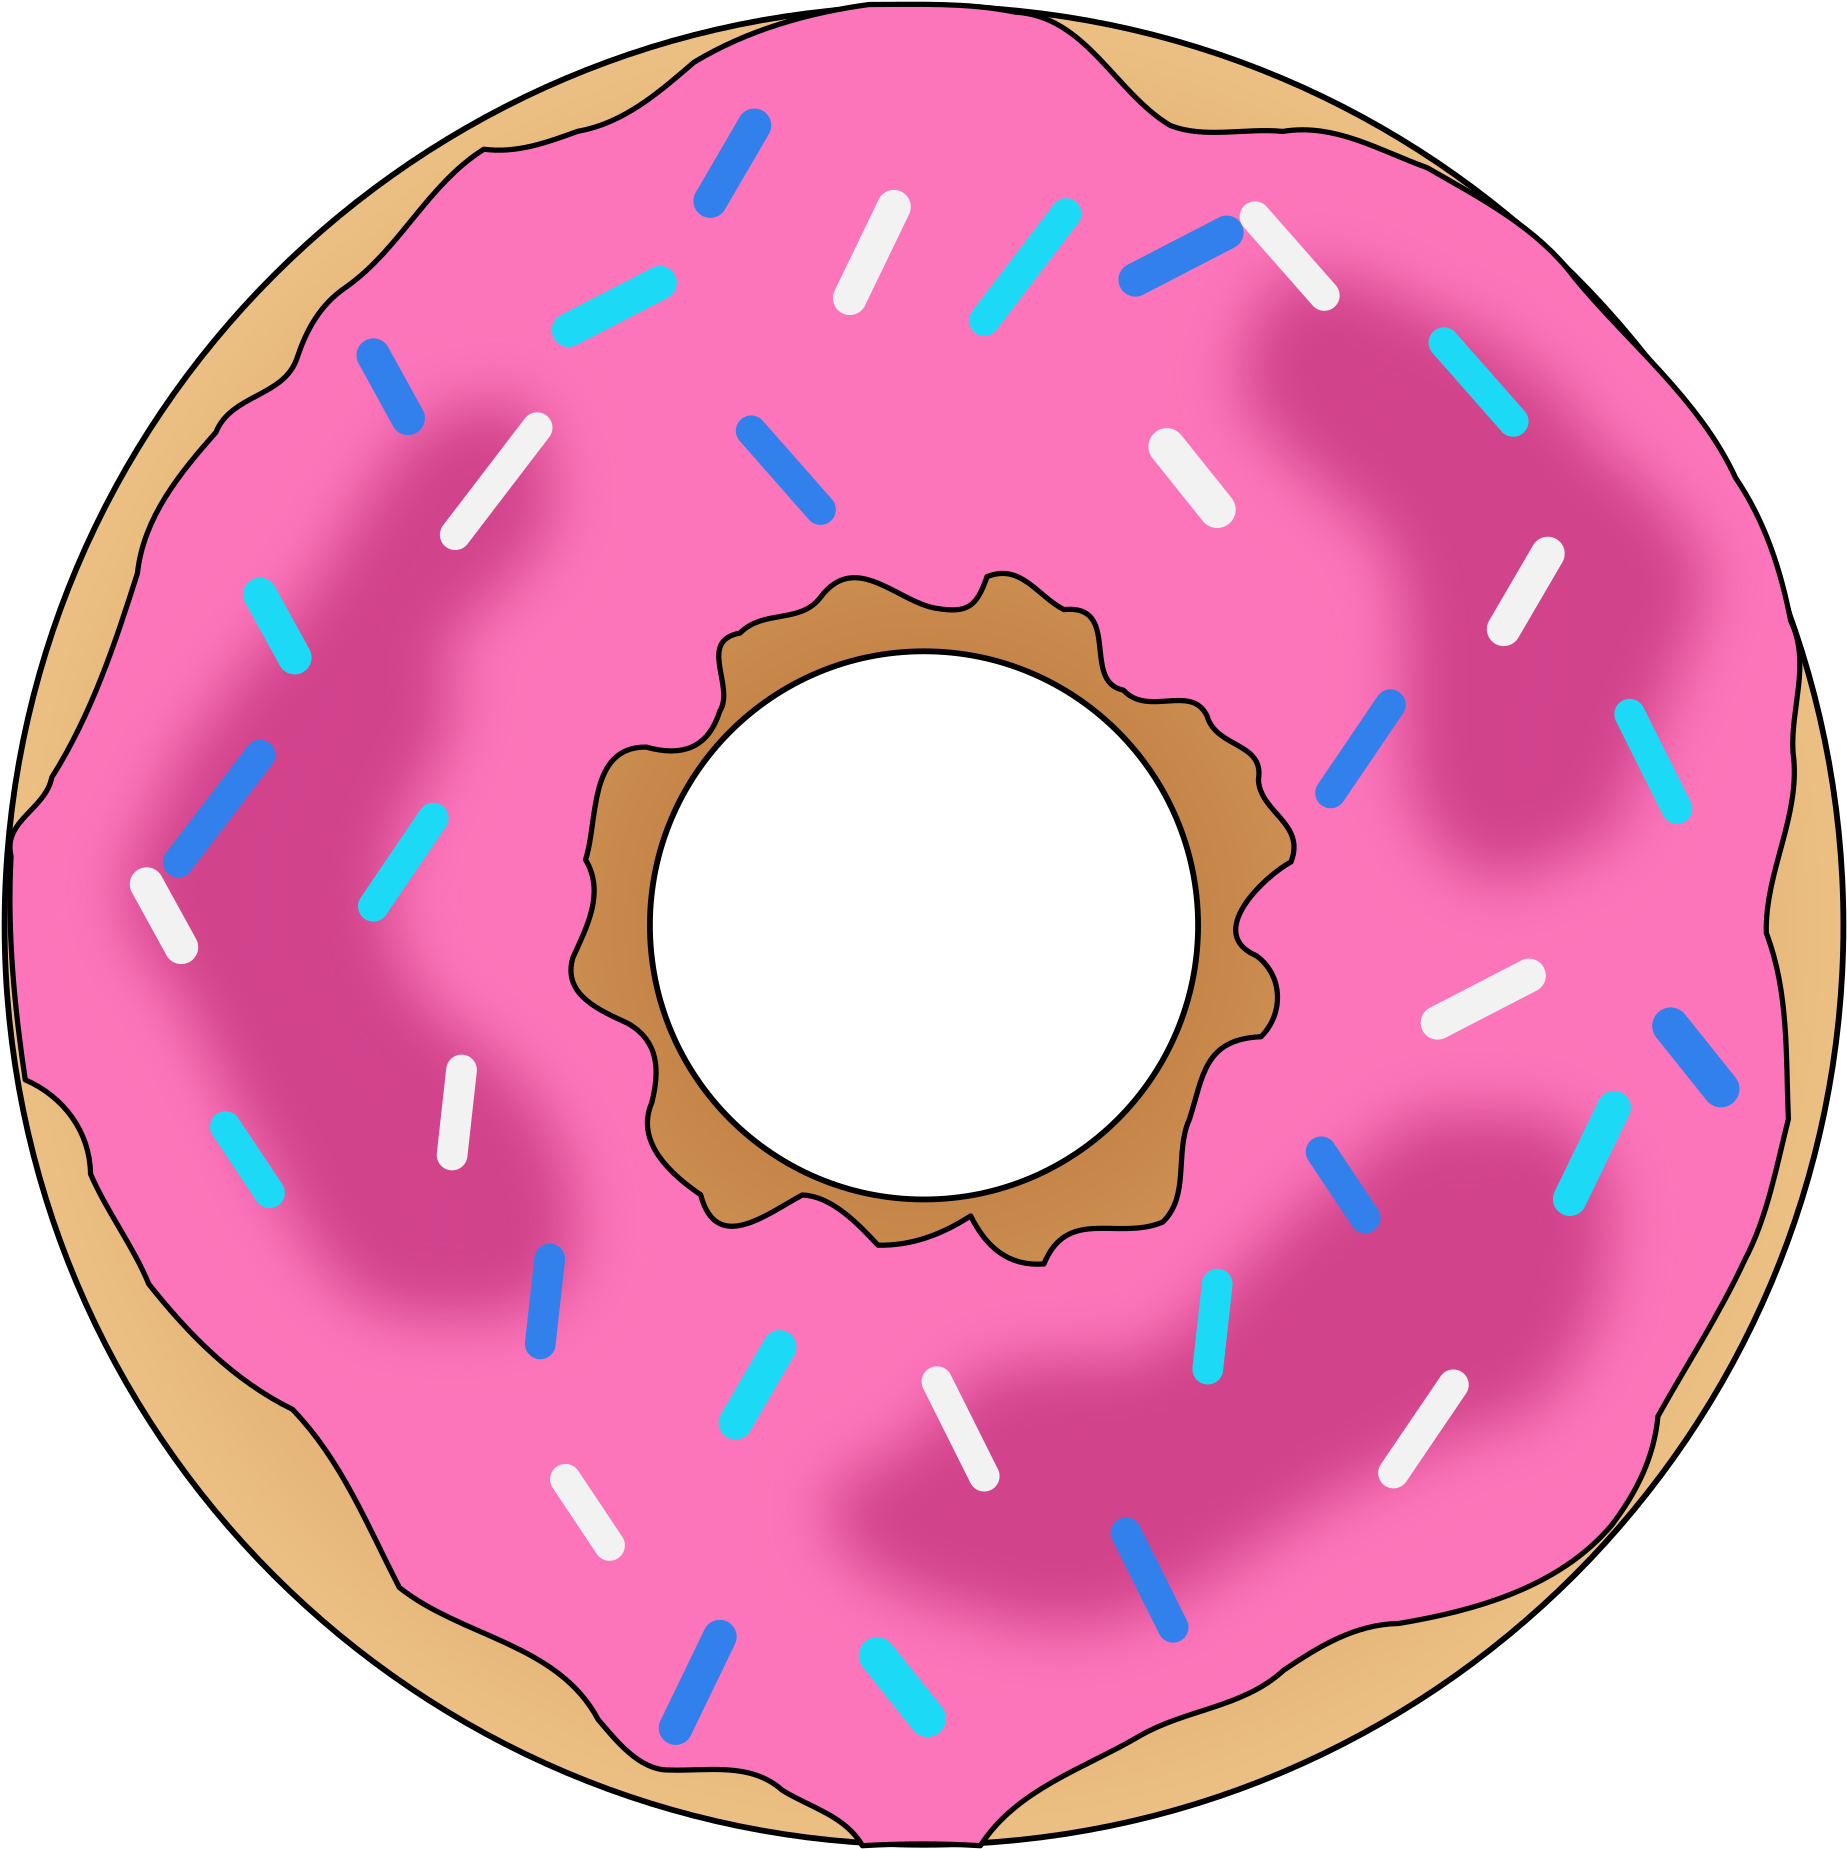 Donut - Donut Png (2398x2400)